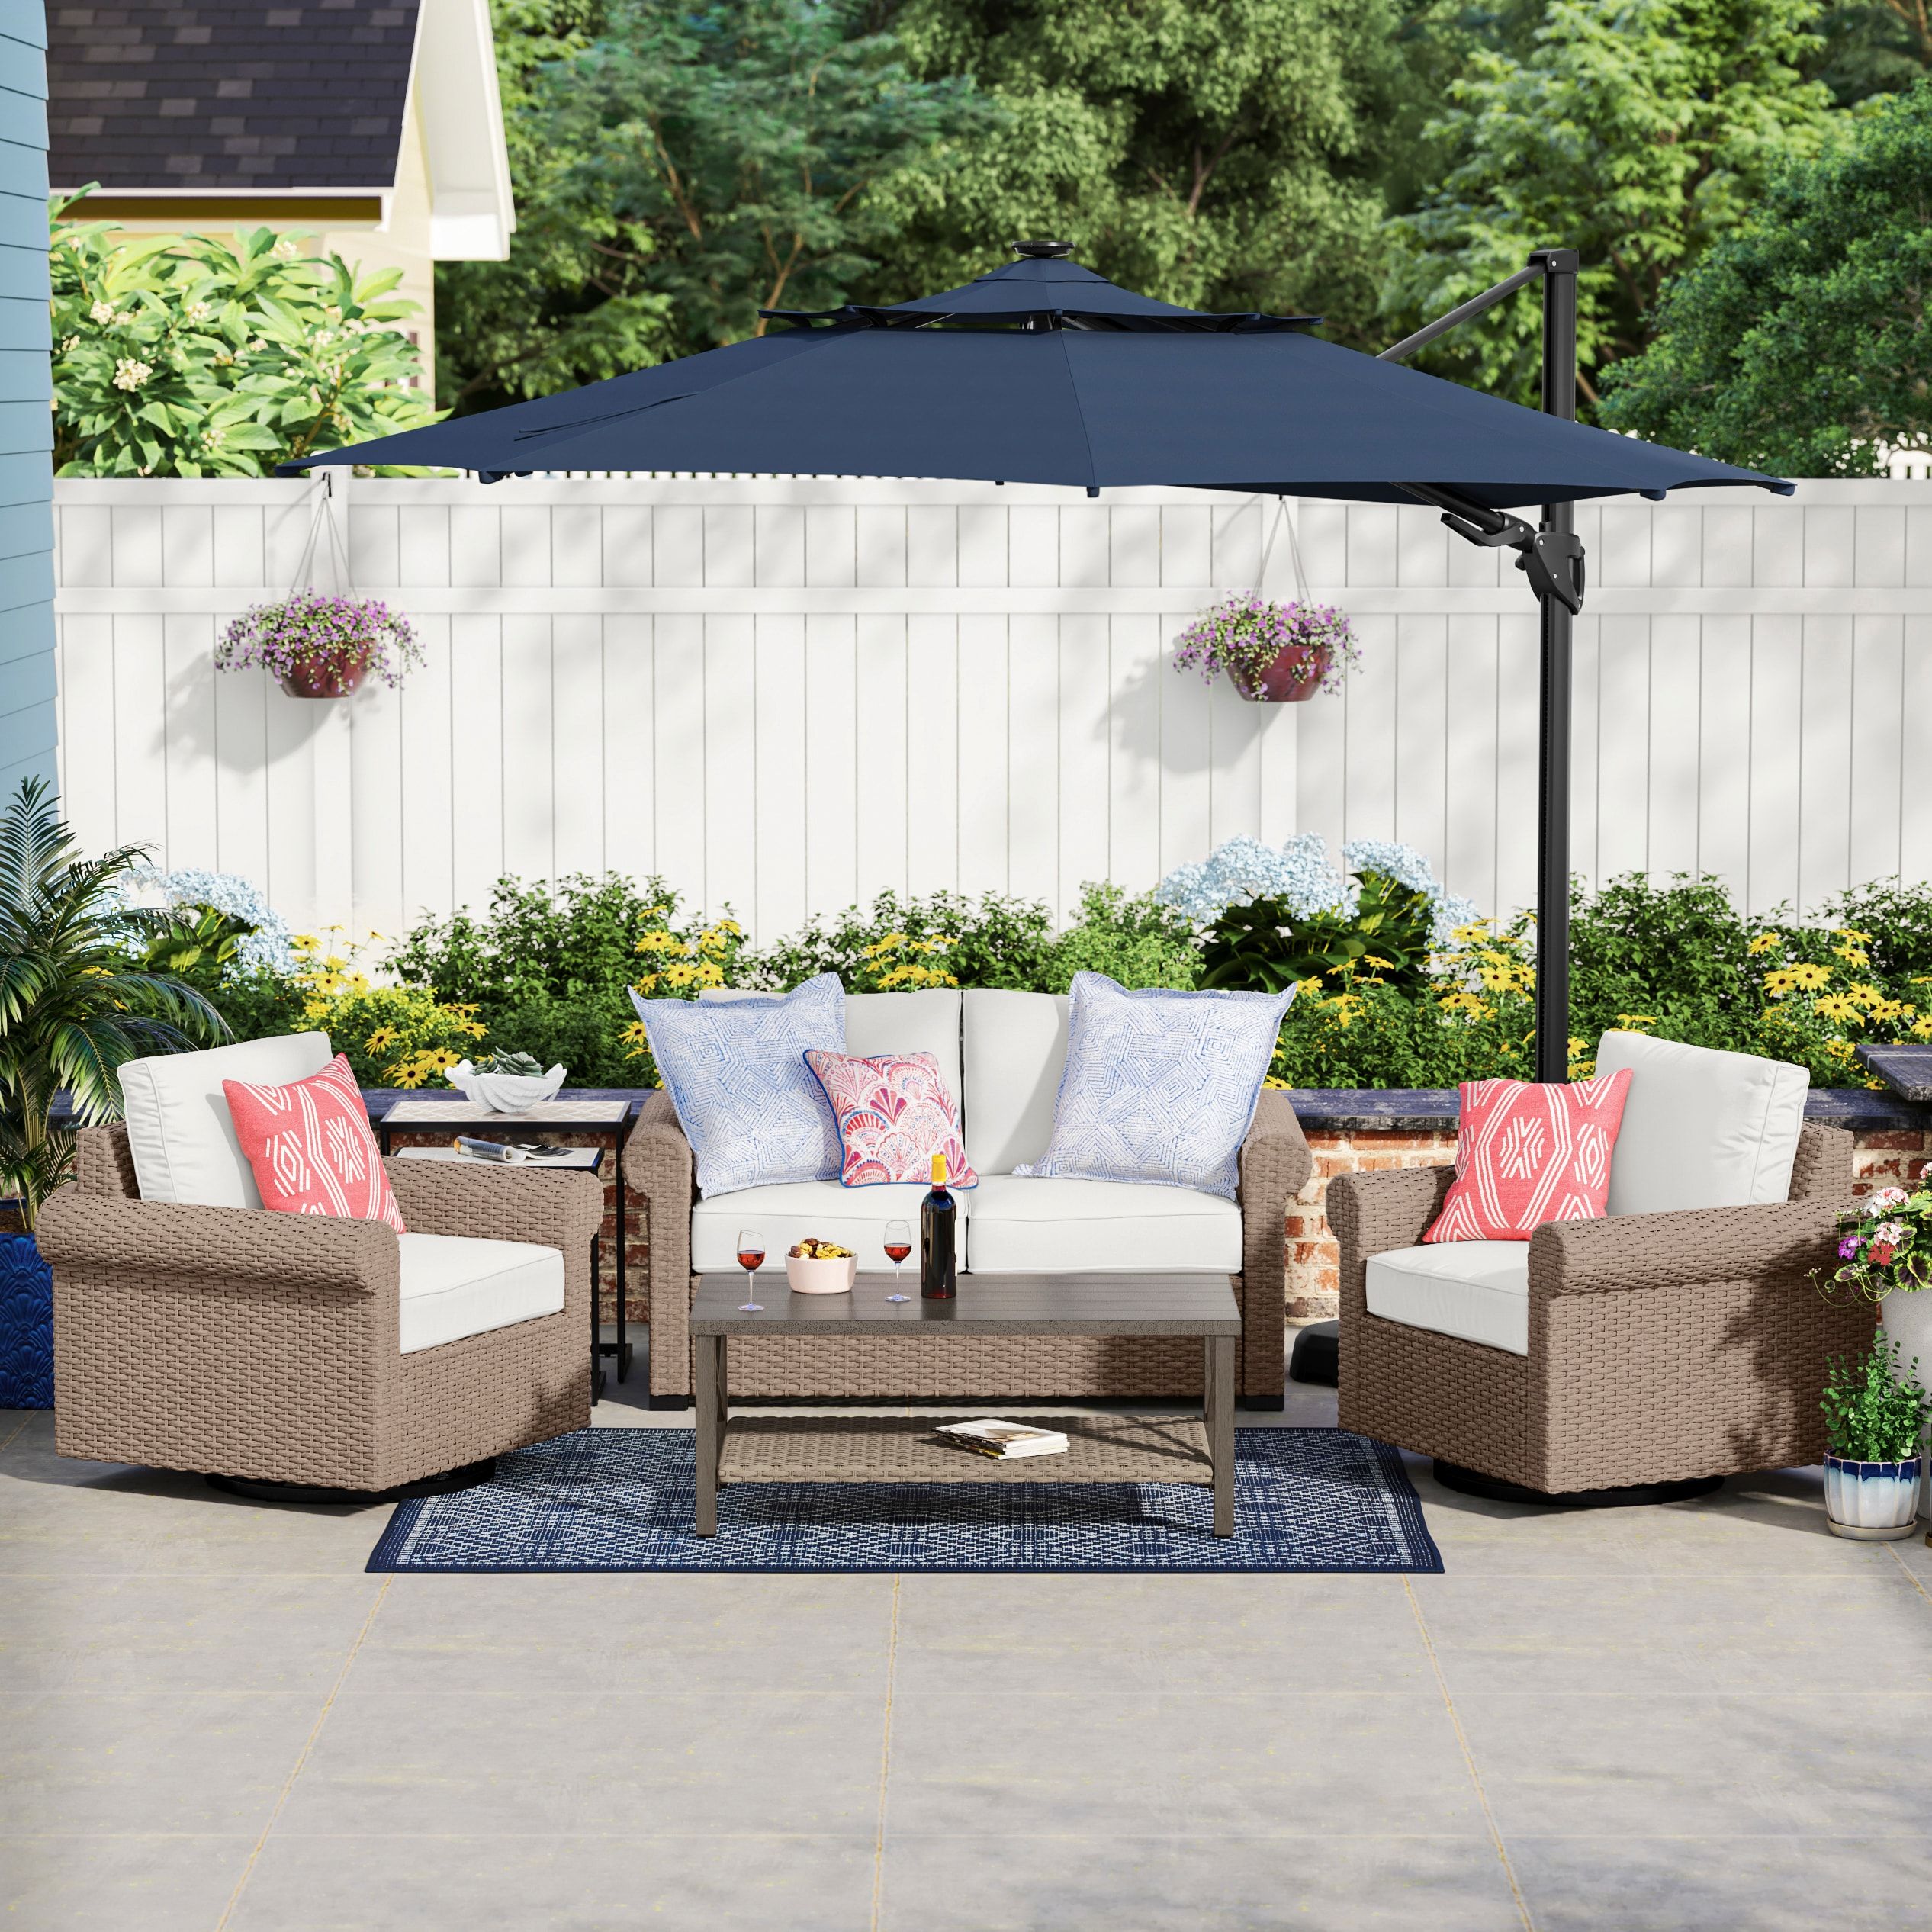 Shop Allen + Roth Emerald Cove 4 Piece Patio Conversation Set With Loveseat  At Lowes Within Loveseat Chairs For Backyard (View 9 of 15)